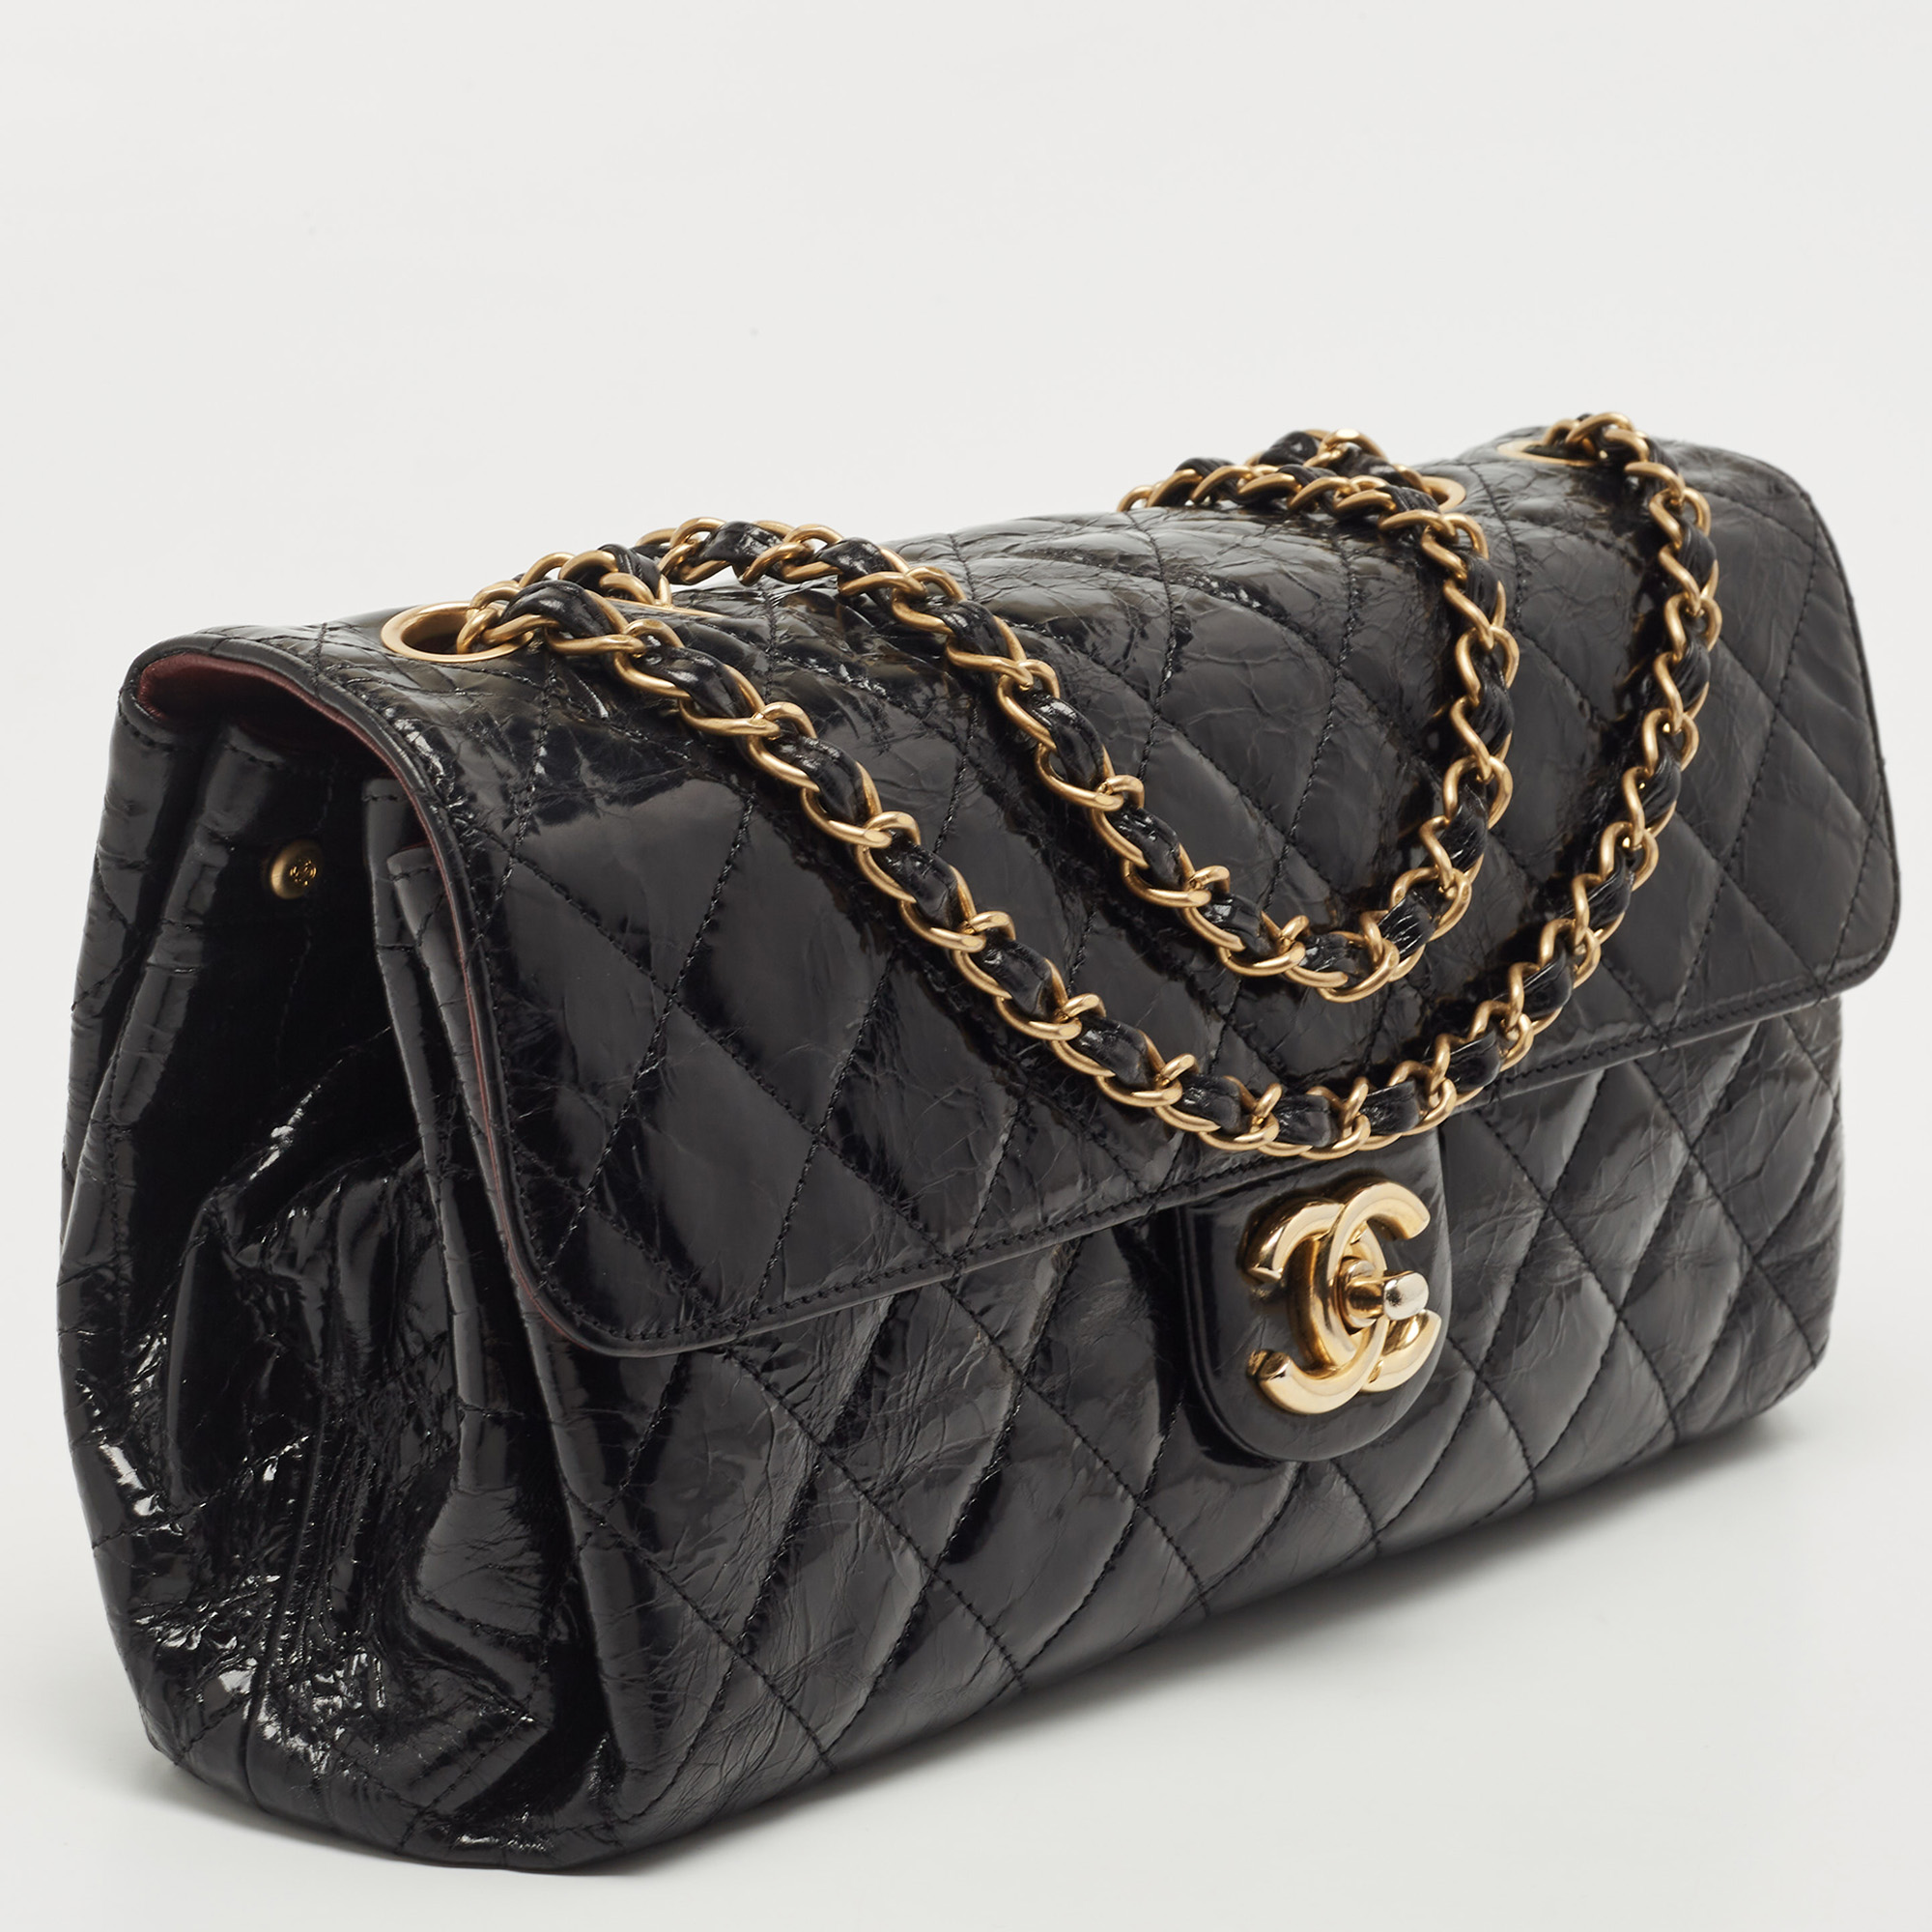 Chanel Black Quilted Leather CC Flap Bag